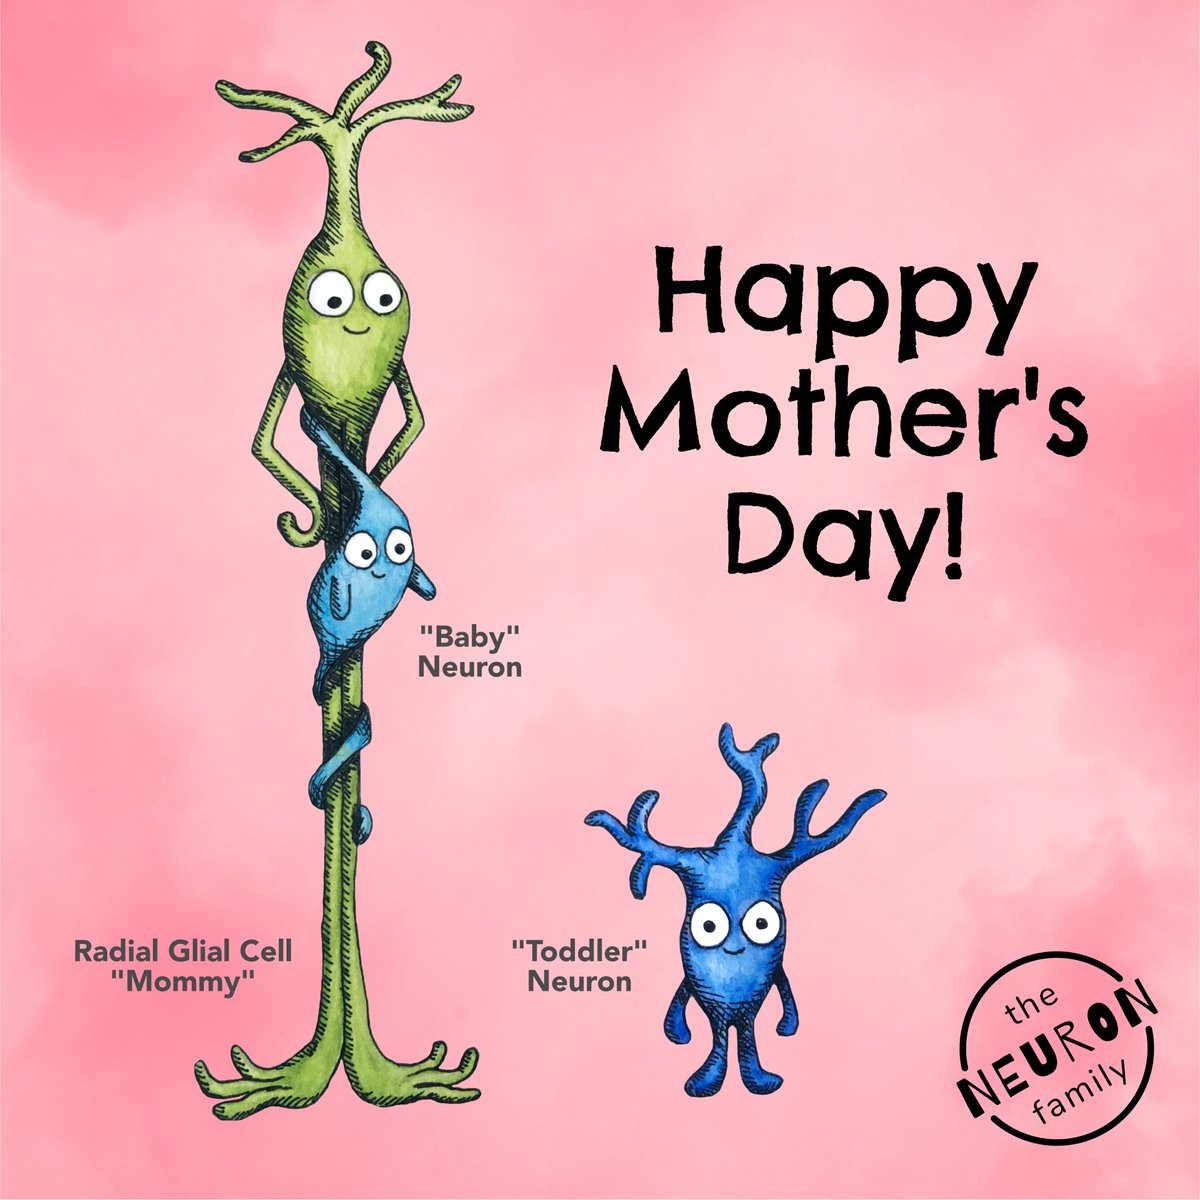 Happy Mother's Day! 💕 . From our developmental neurons - includes a Mommy Radial Glial Cell, a Baby Neuron and a Toddler Neuron!